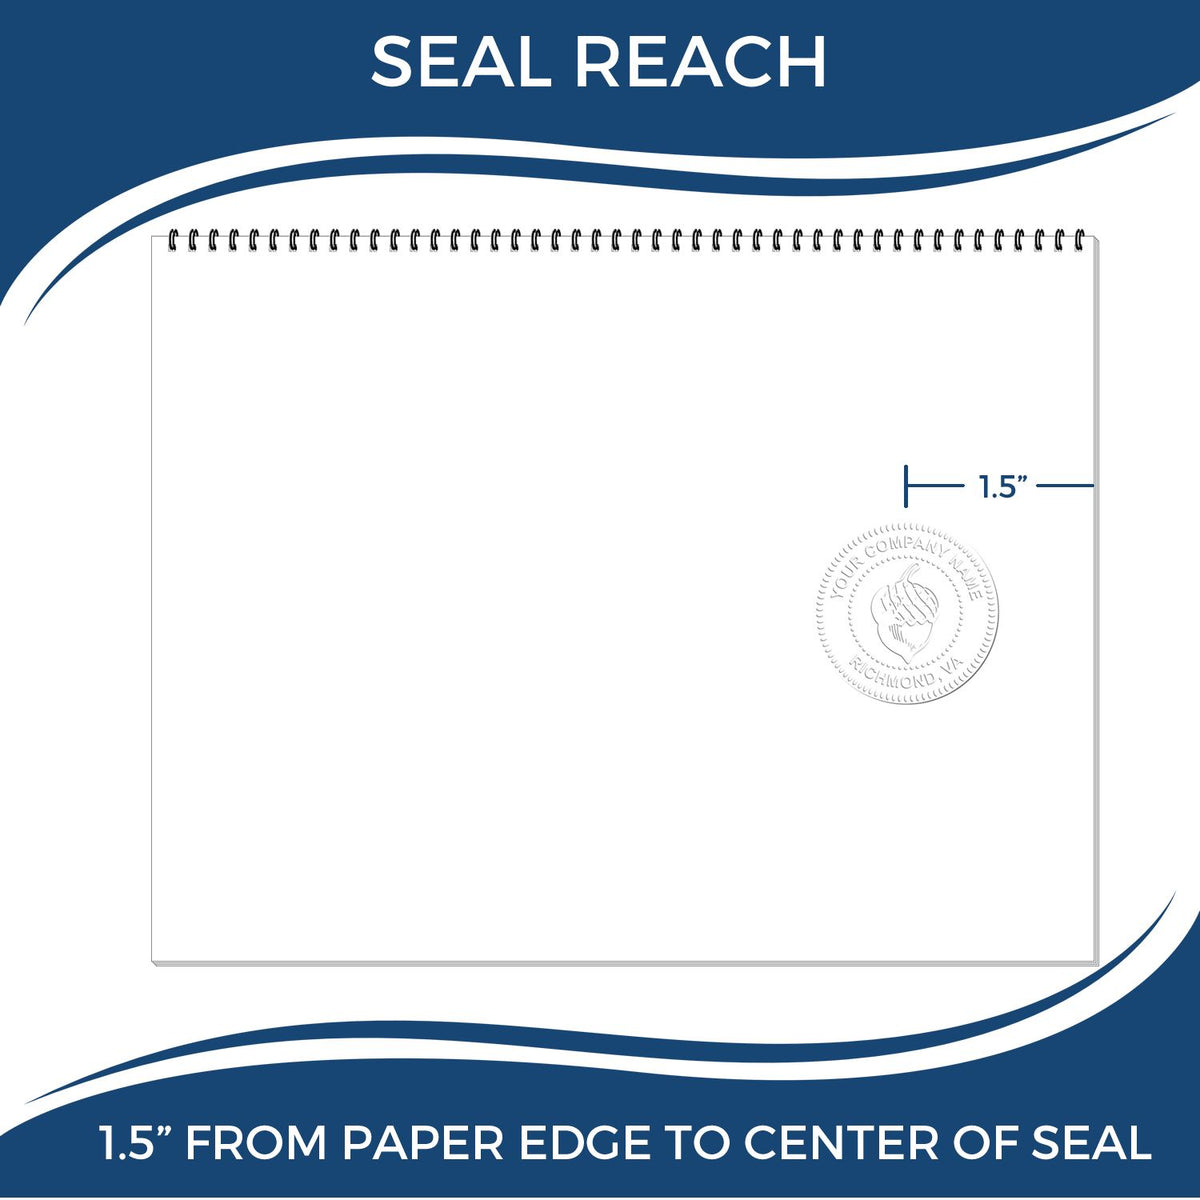 An infographic showing the seal reach which is represented by a ruler and a miniature seal image of the Soft Oregon Professional Geologist Seal